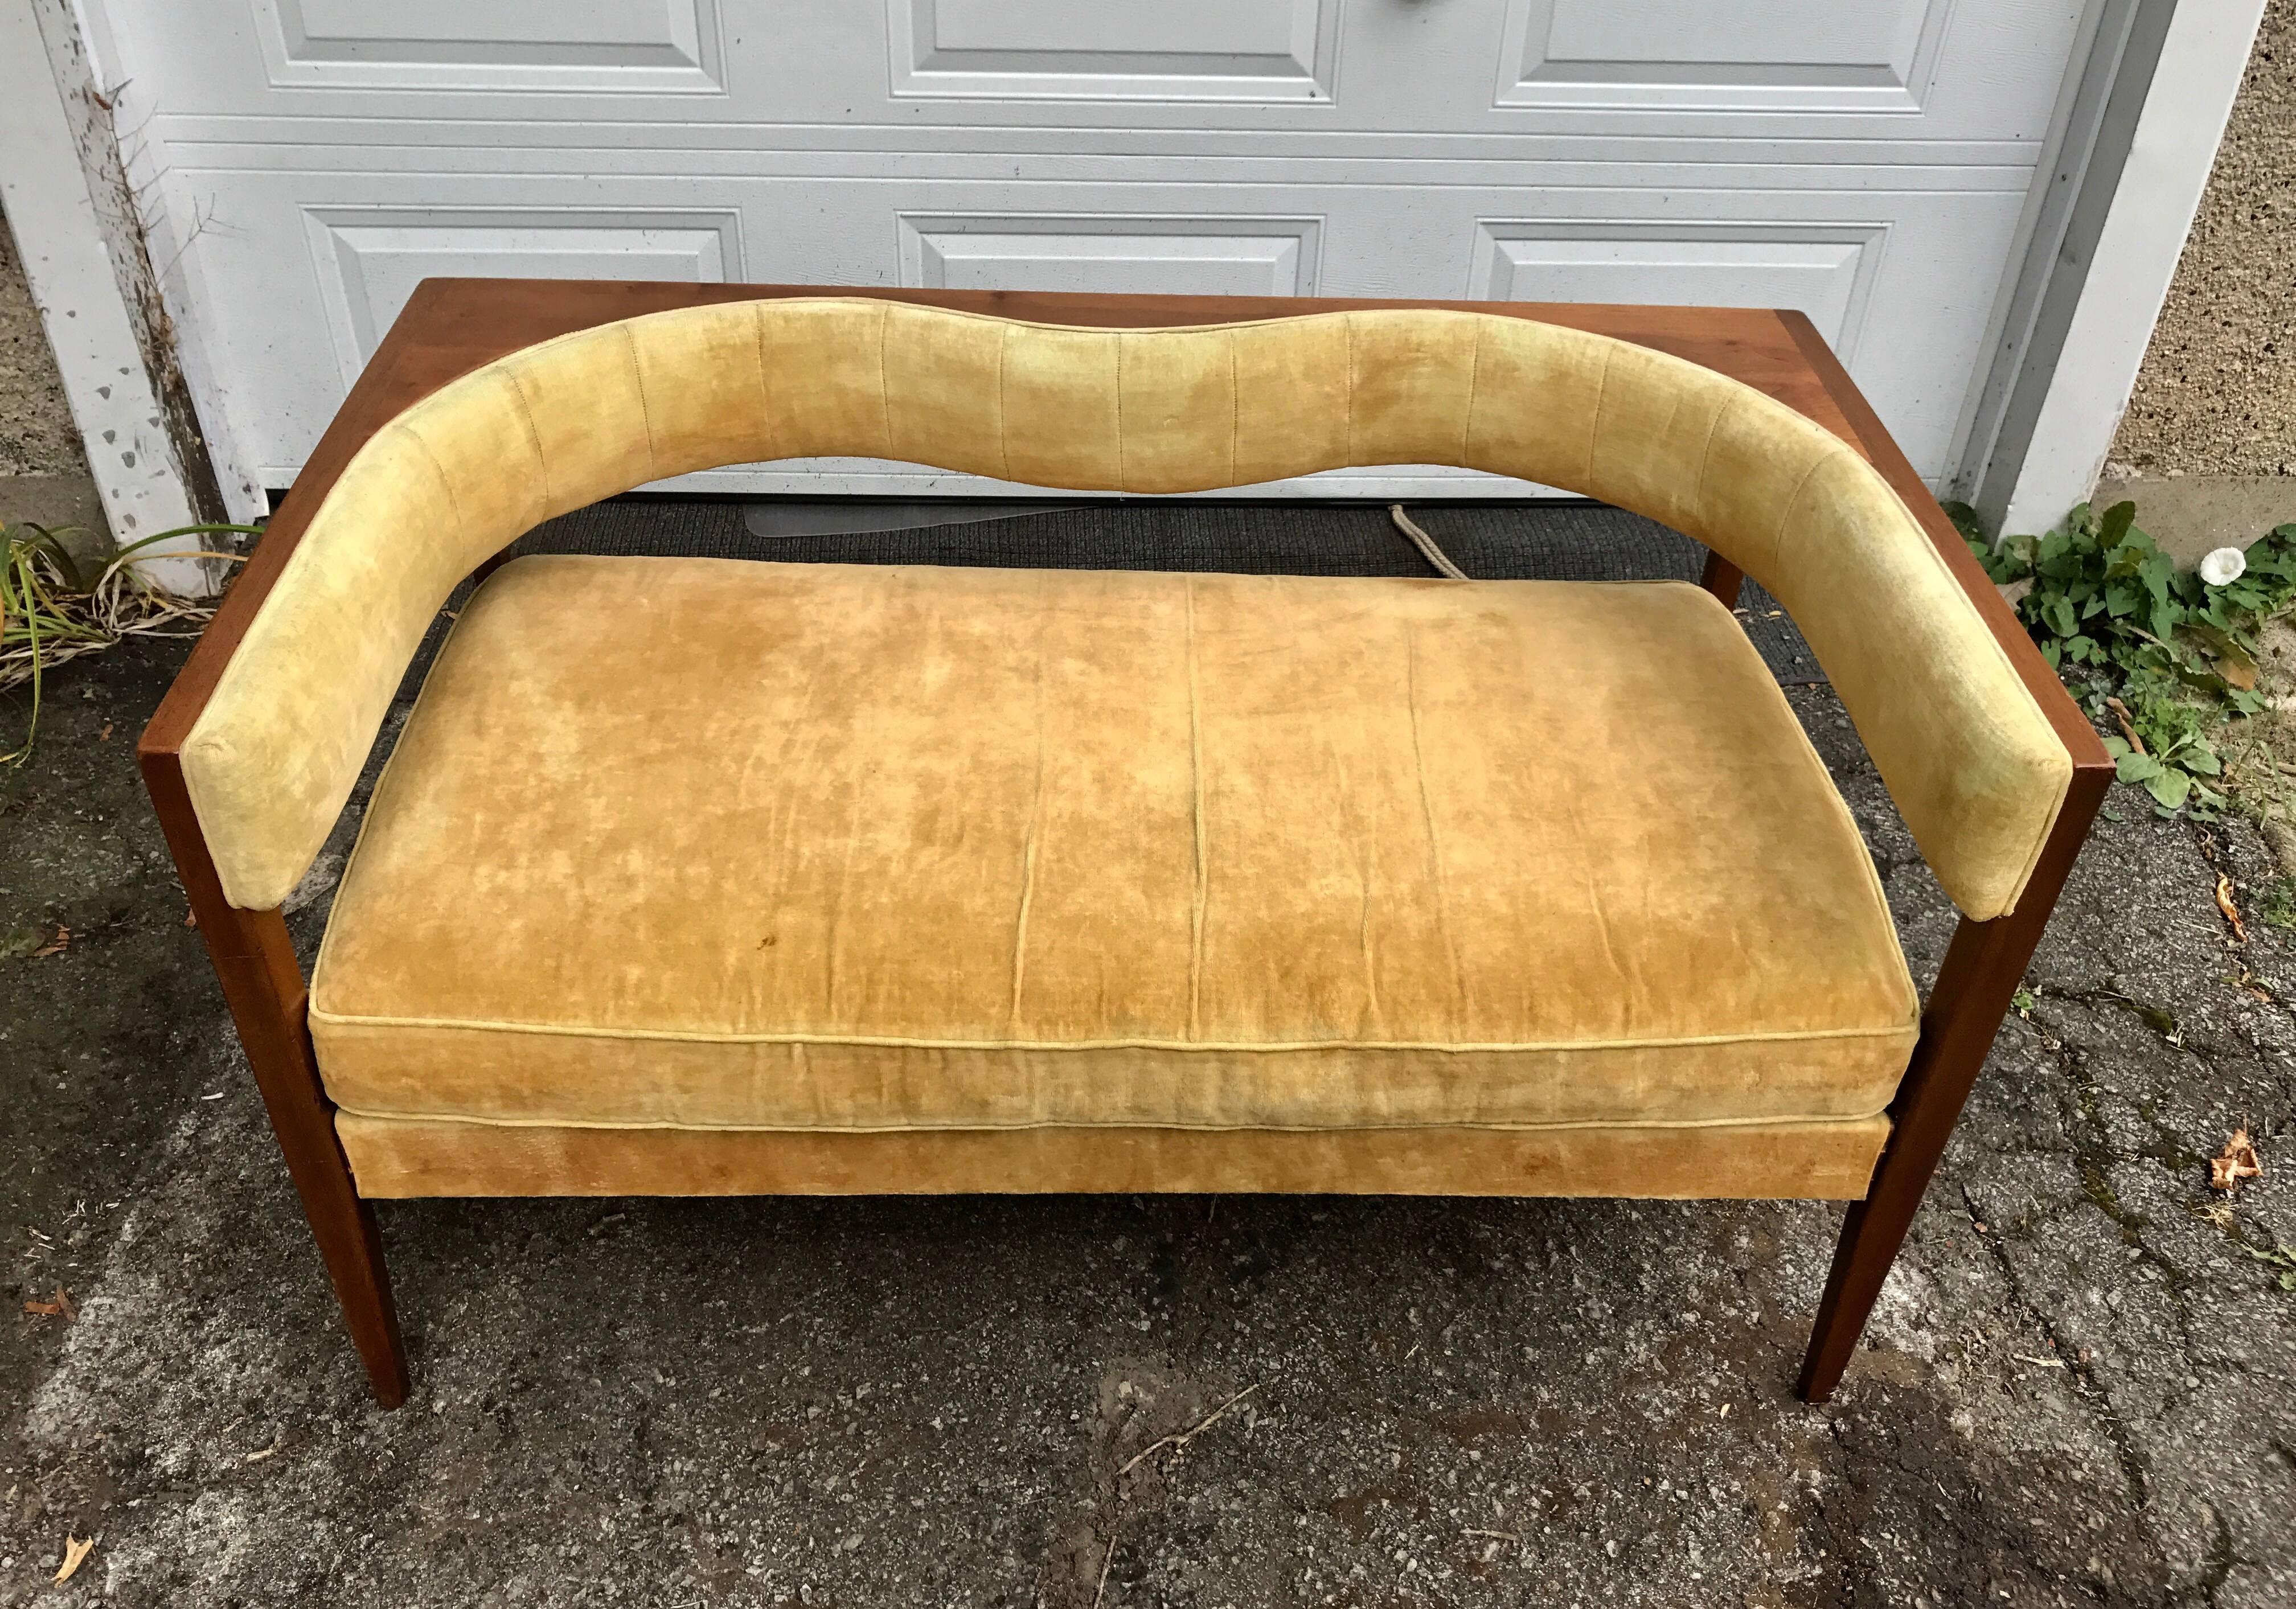 Rare modernist settee designed by John Van Koert for Drexel, from the counterpoint line, 1957, Possibly a custom order? Have never seen this version, only single chairs. Stunning lines, extremely comfortable and practical, hand delivery avail to New